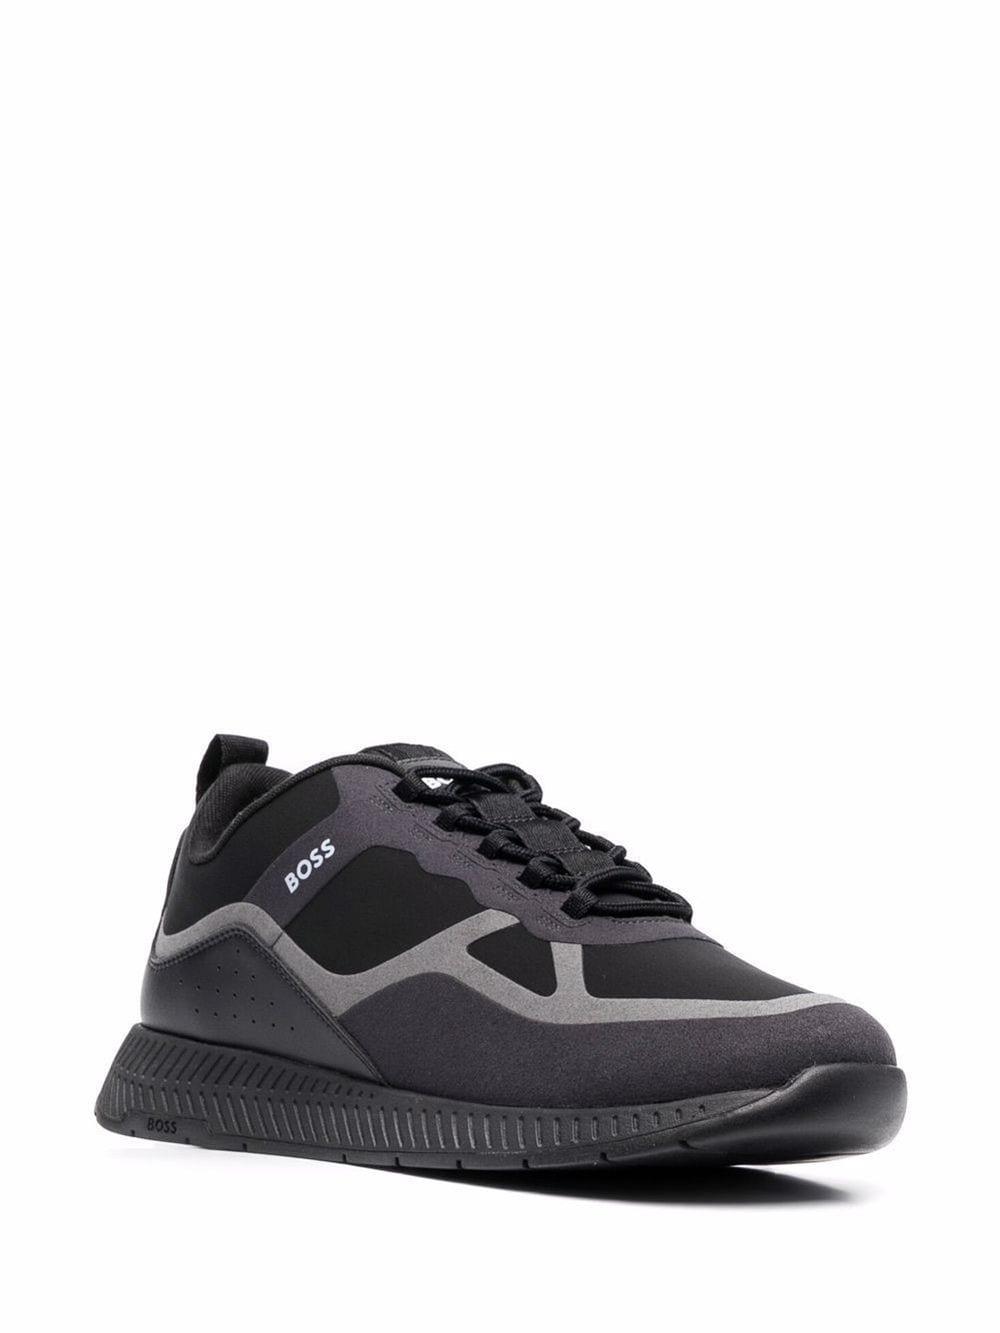 BOSS by HUGO BOSS Titanium Run Lace-up Trainers in Black for Men | Lyst